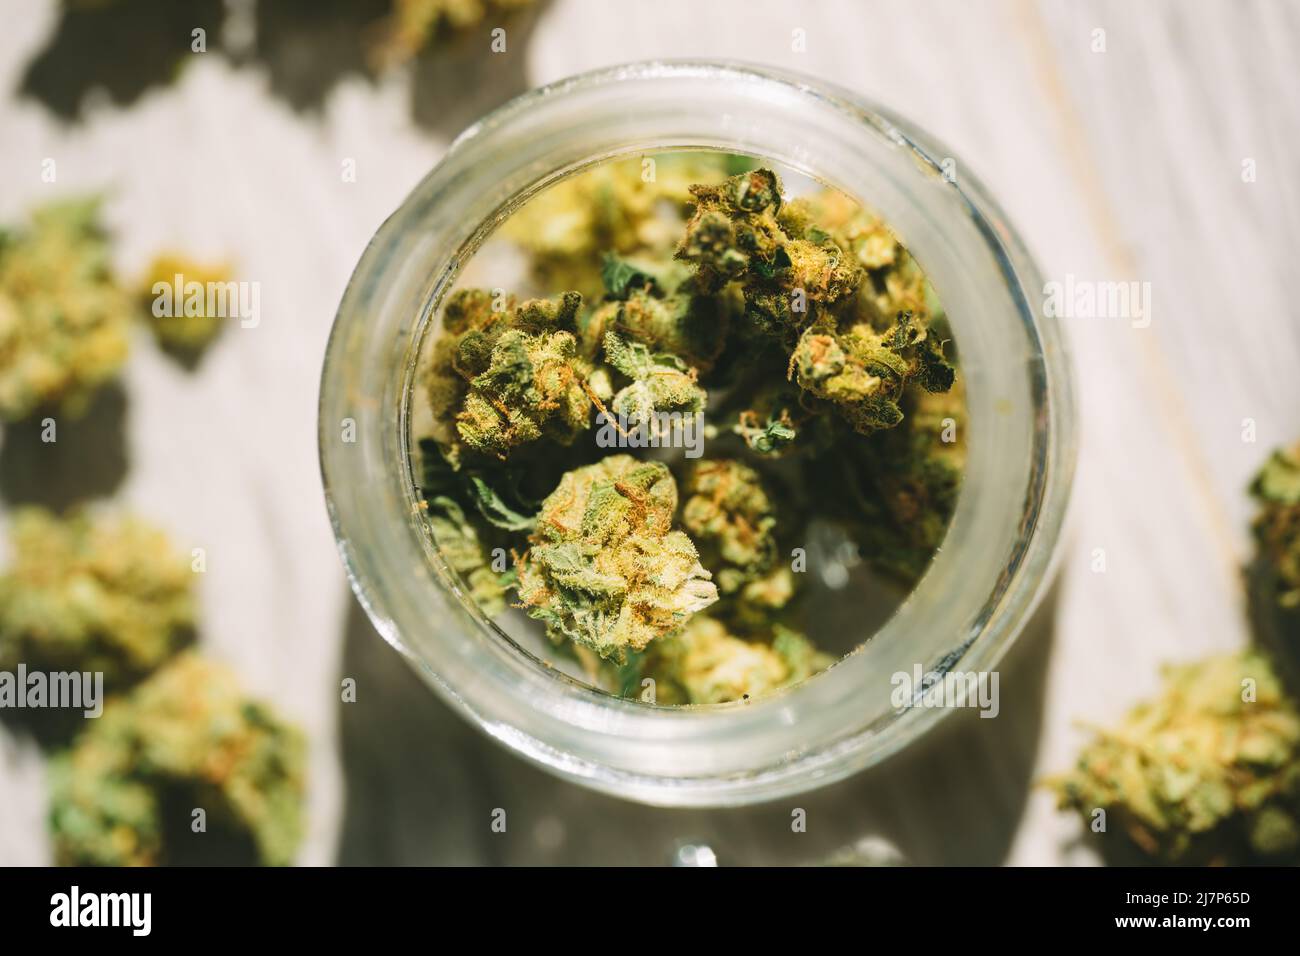 Close up of medical marijuana or cannabis flower buds in glass jar Stock Photo